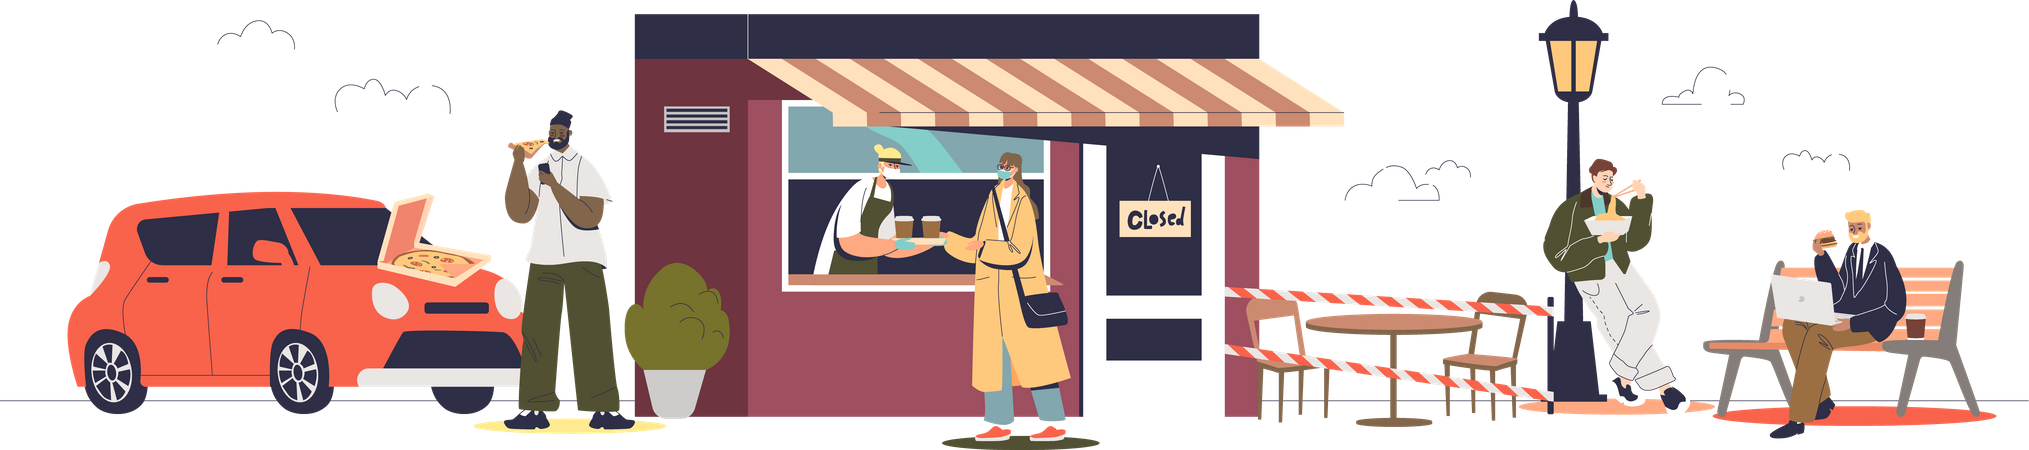 People buying takeaway food and beverages in cafe for covid protection and prevention Illustration